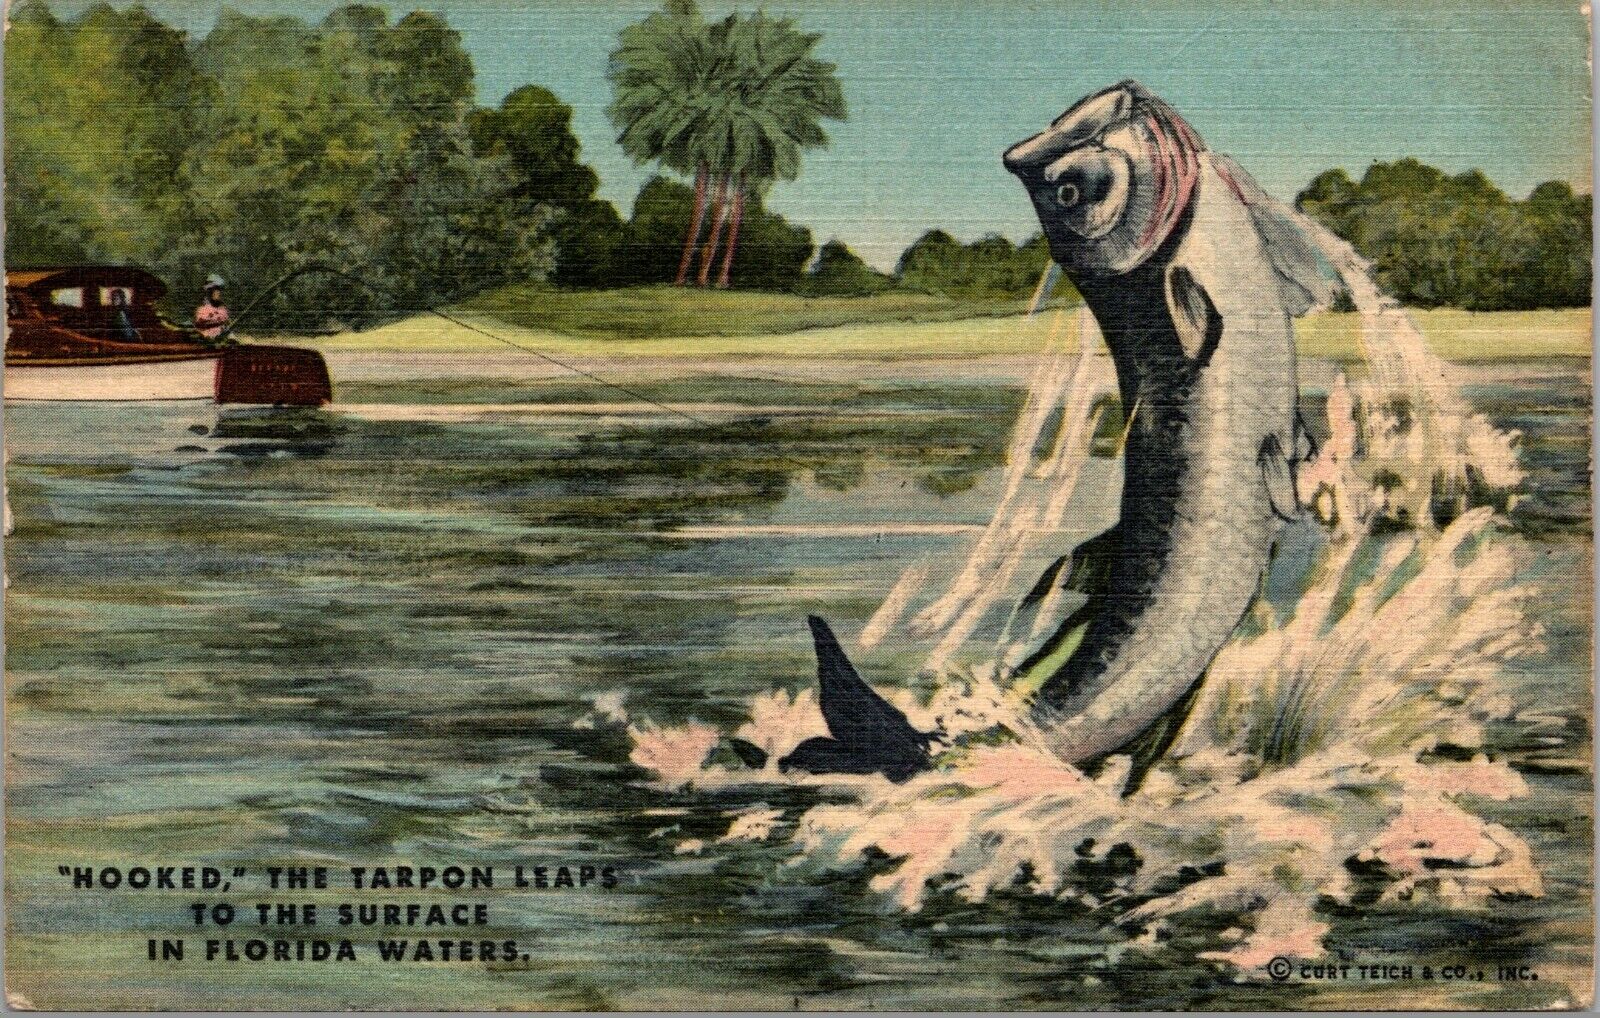 Postcard Hooked the Tarpon Leaps to the Surface in Florida waters fish boat